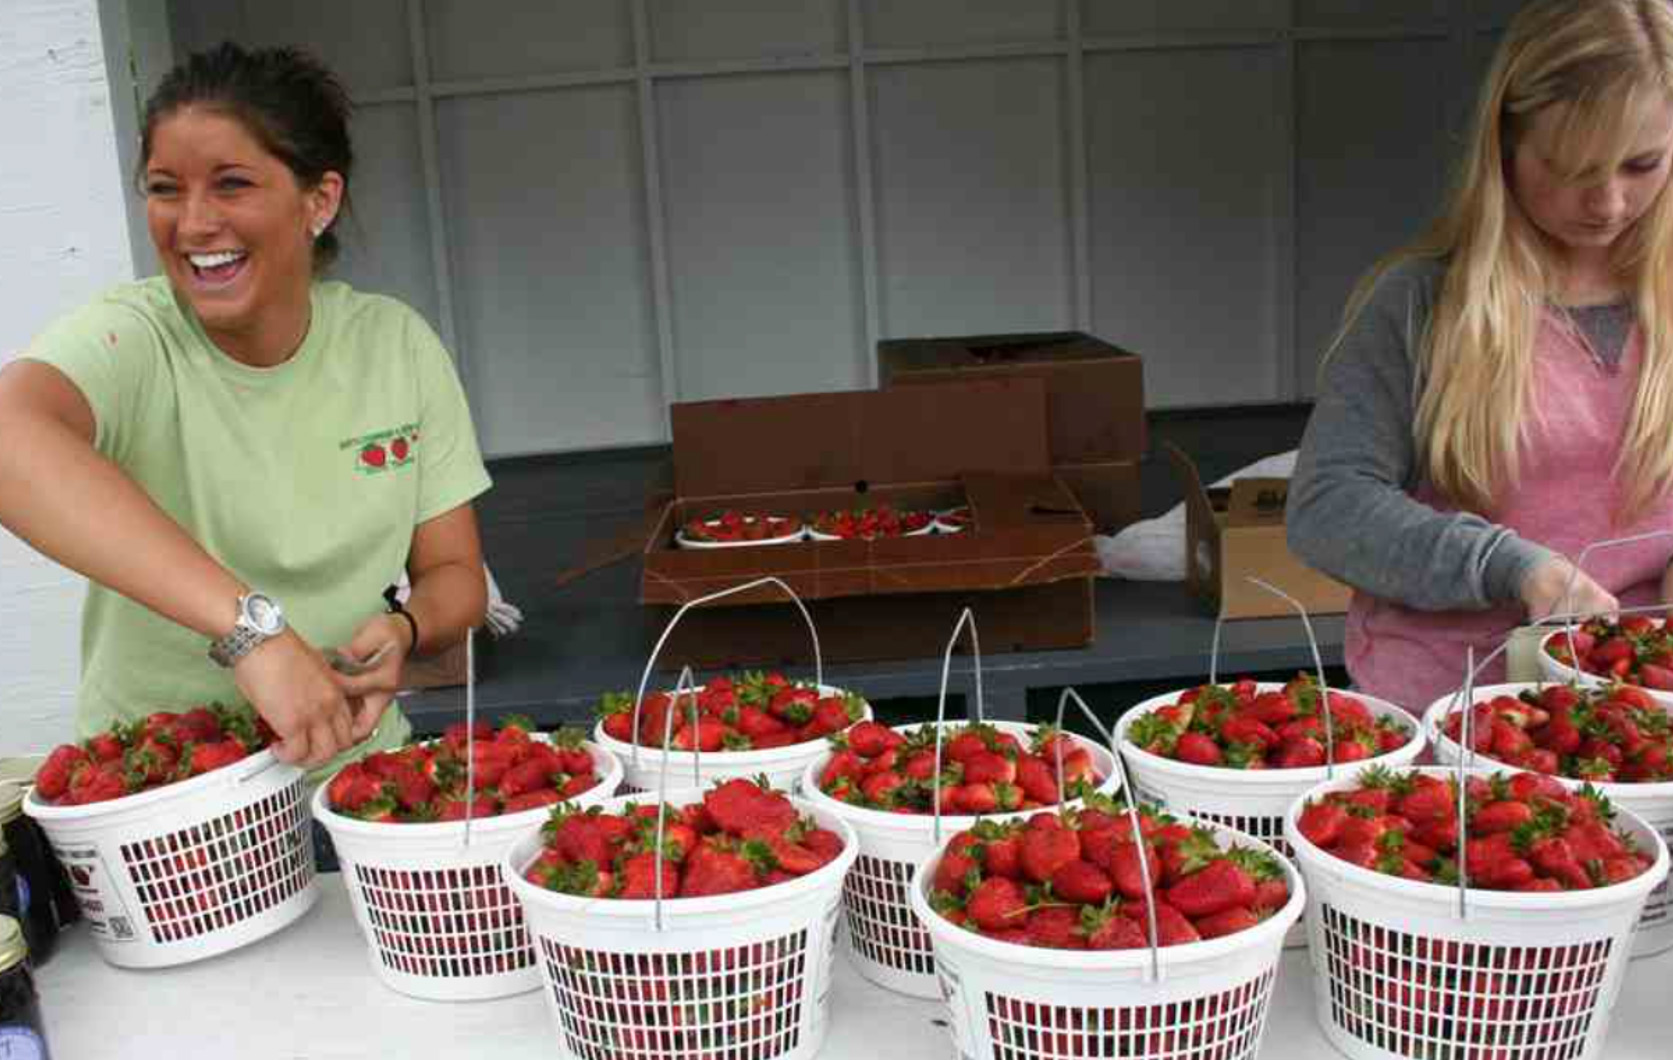 Buy them by the pint, quart, or gallon, Scott’s Farms strawberries are the highlight of the region’s growing season.